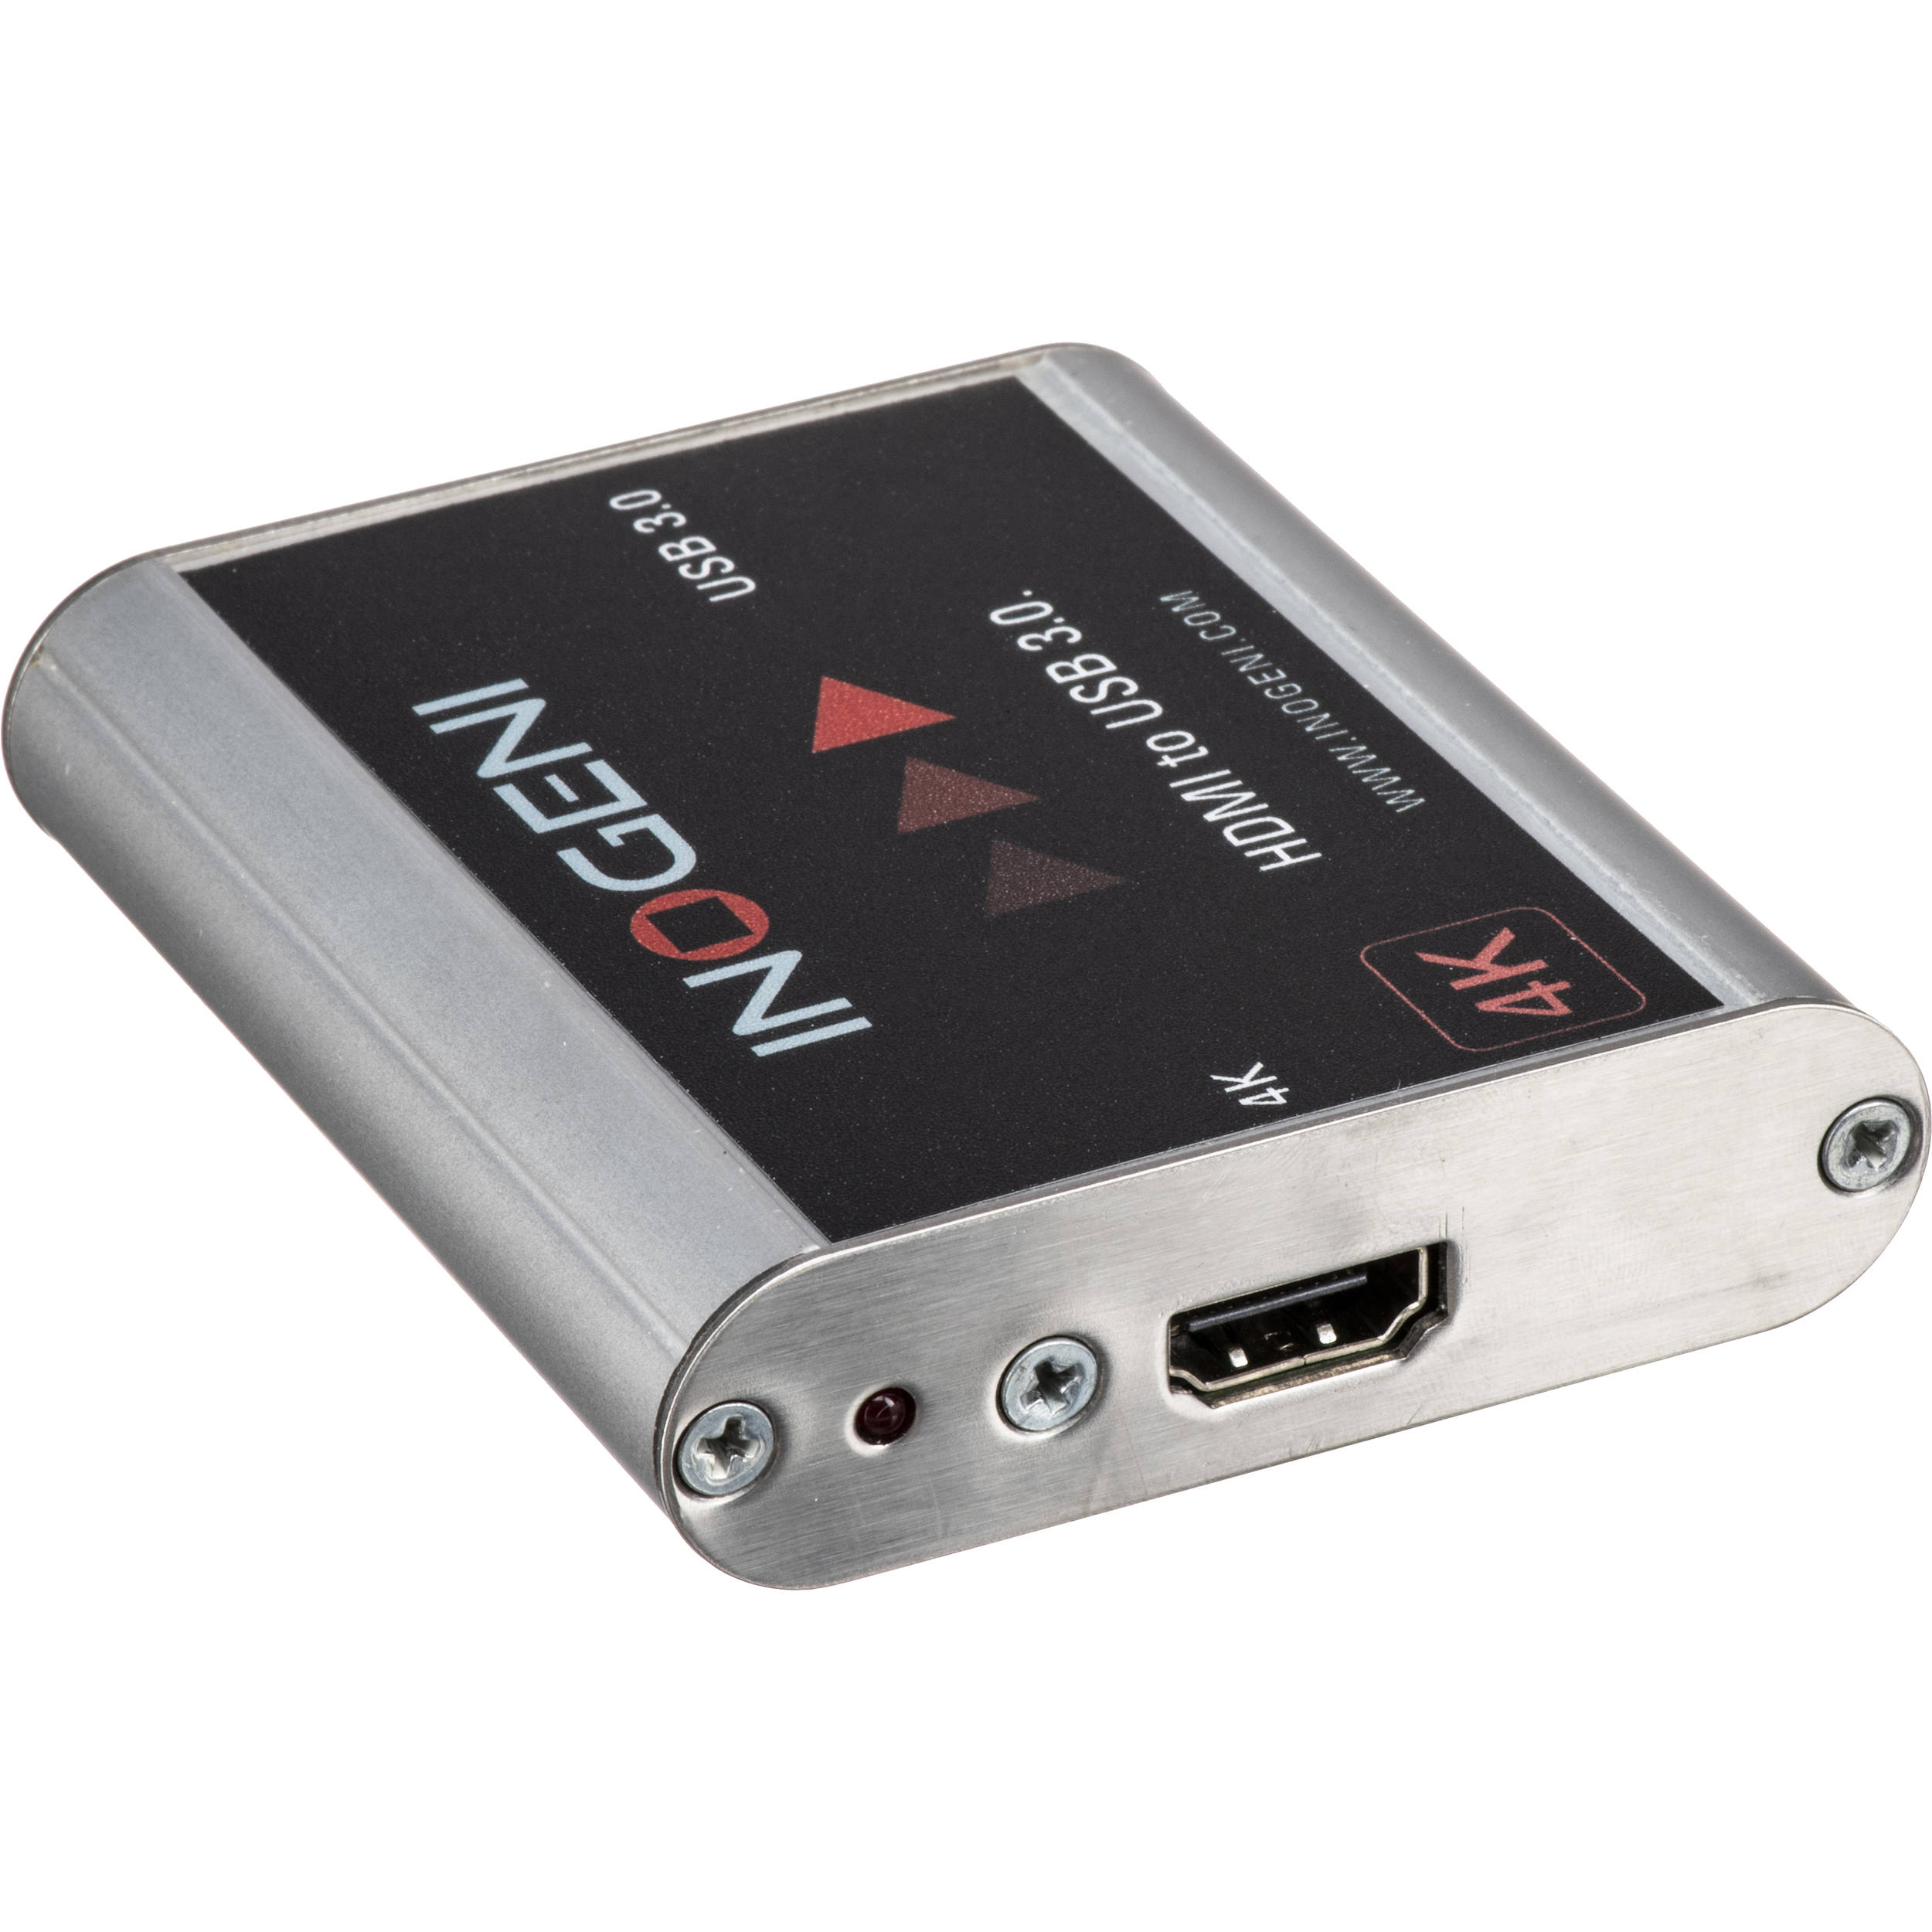 pyle phdrcb48 hdmi video capture device